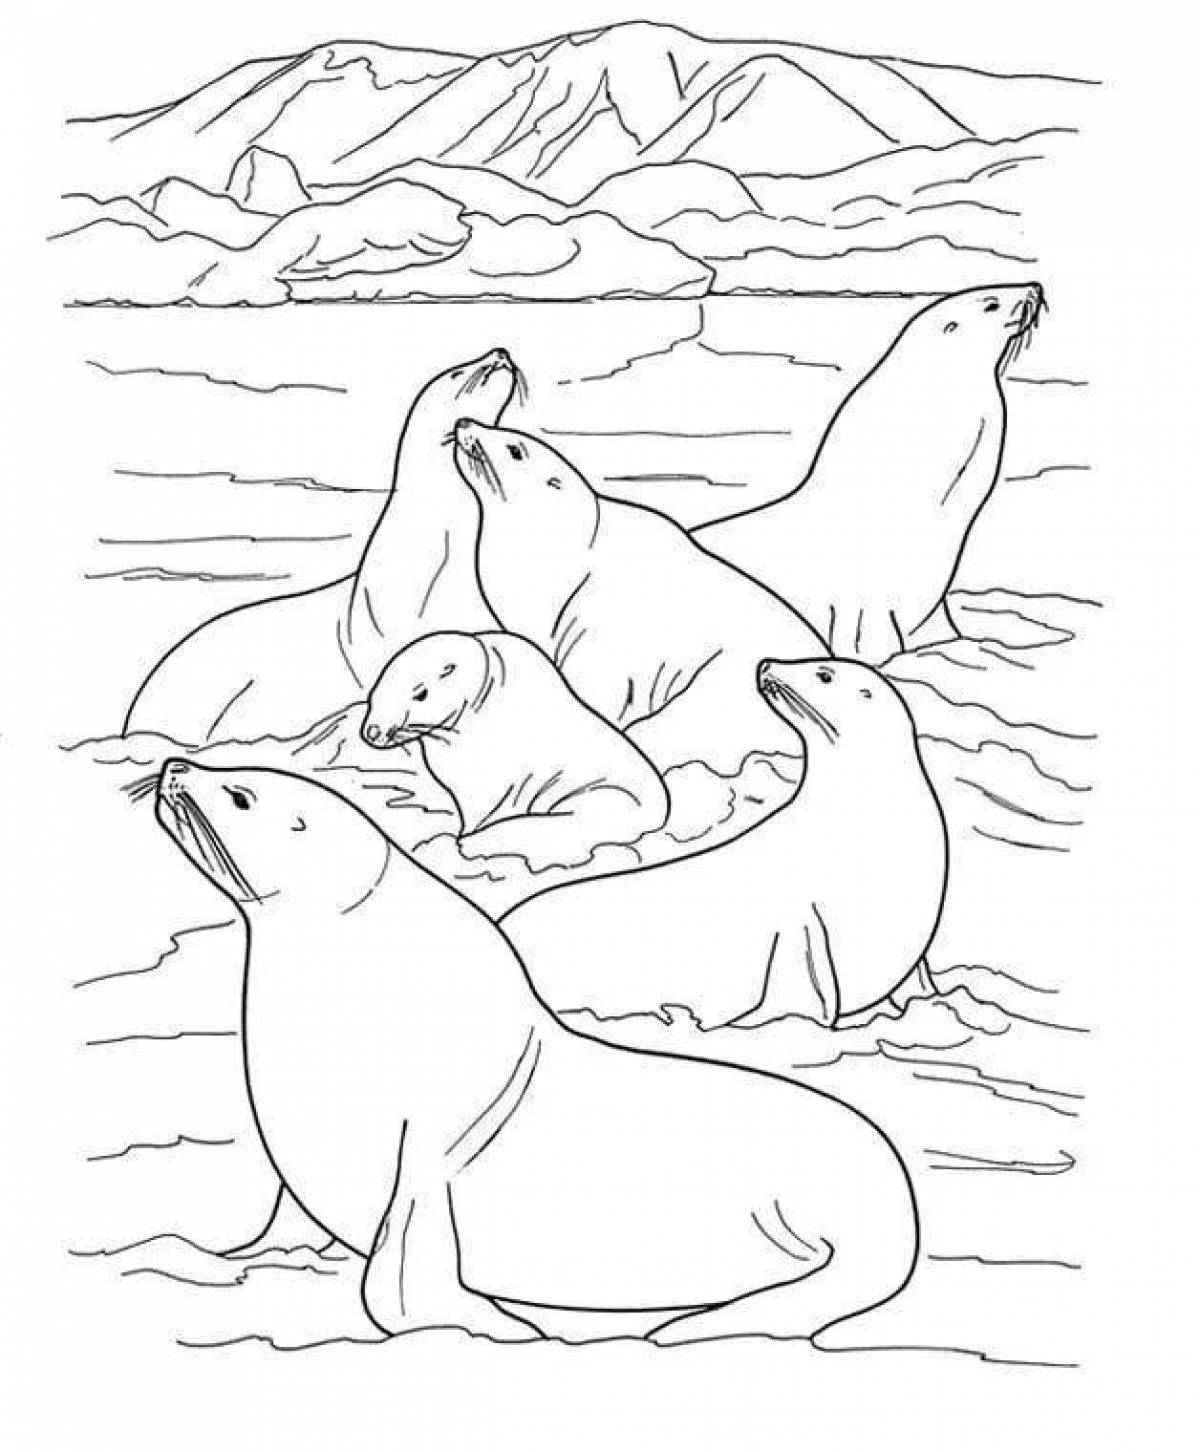 Northern animals coloring pages